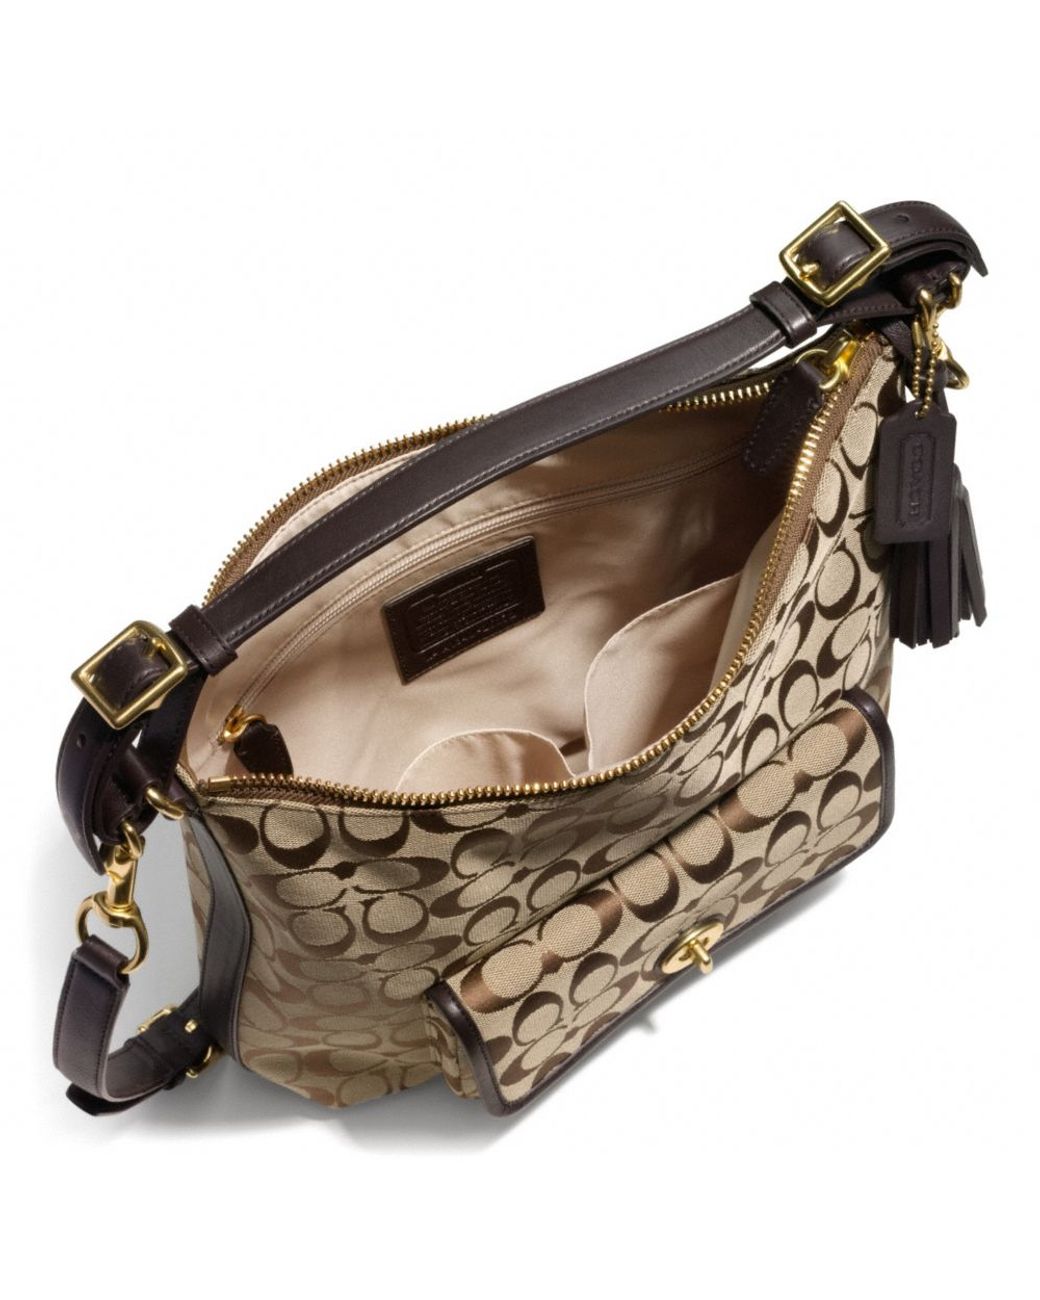 COACH Legacy Courtenay Hobo Shoulder Bag in Signature Fabric in Brown | Lyst